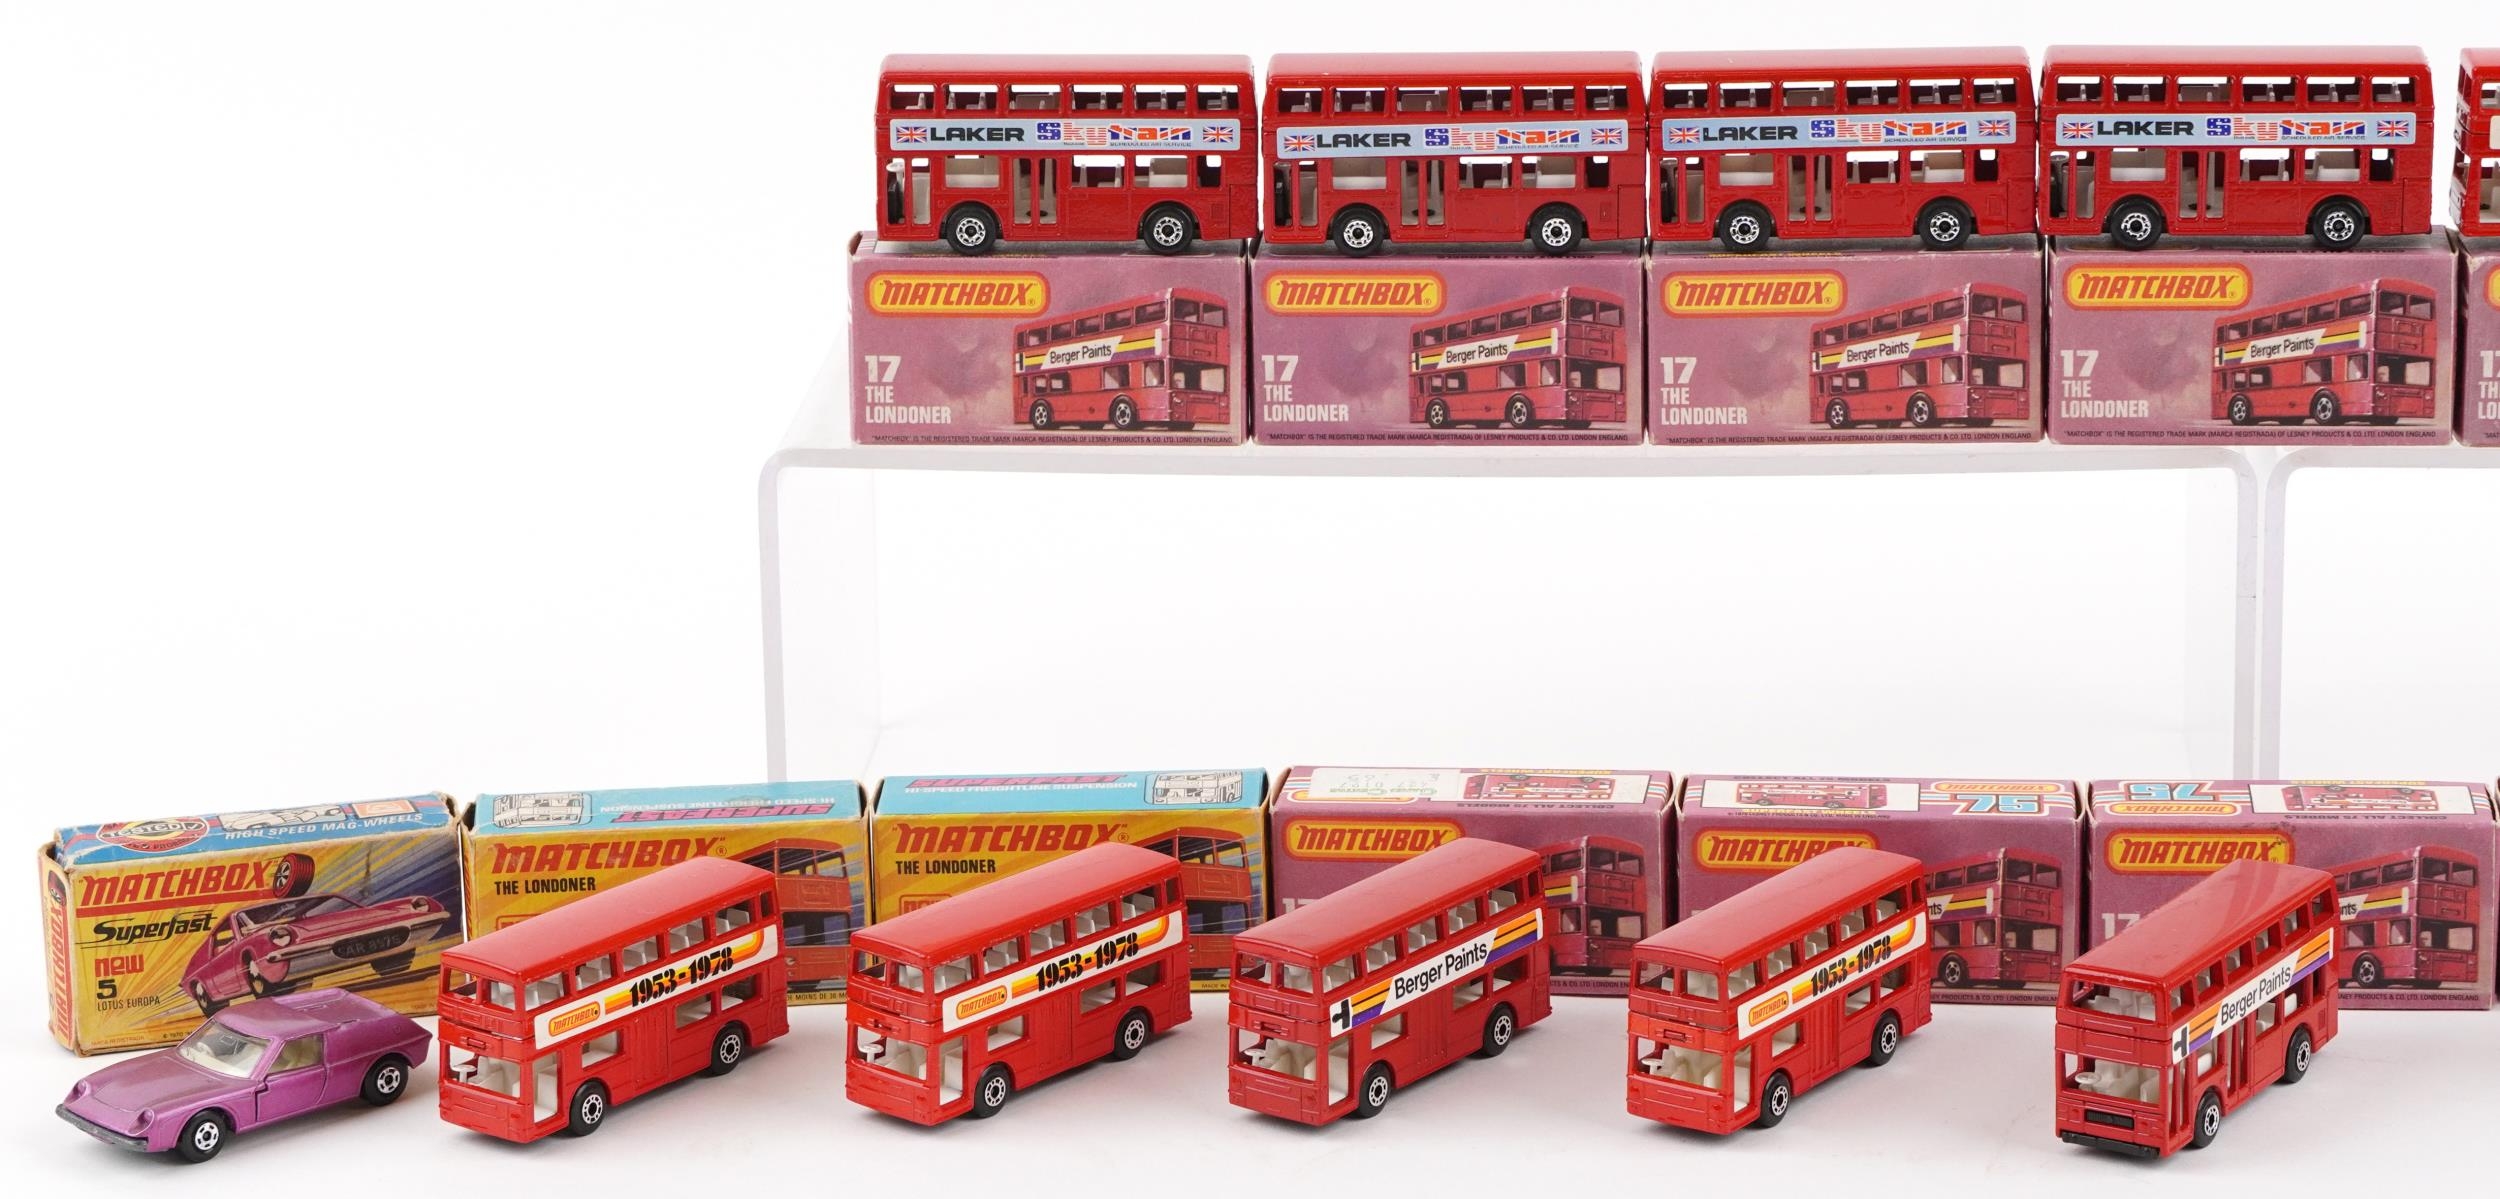 Seventeen vintage Matchbox diecast vehicles with boxes including sixteen Buses, numbers 17, 74 and 5 - Image 2 of 3